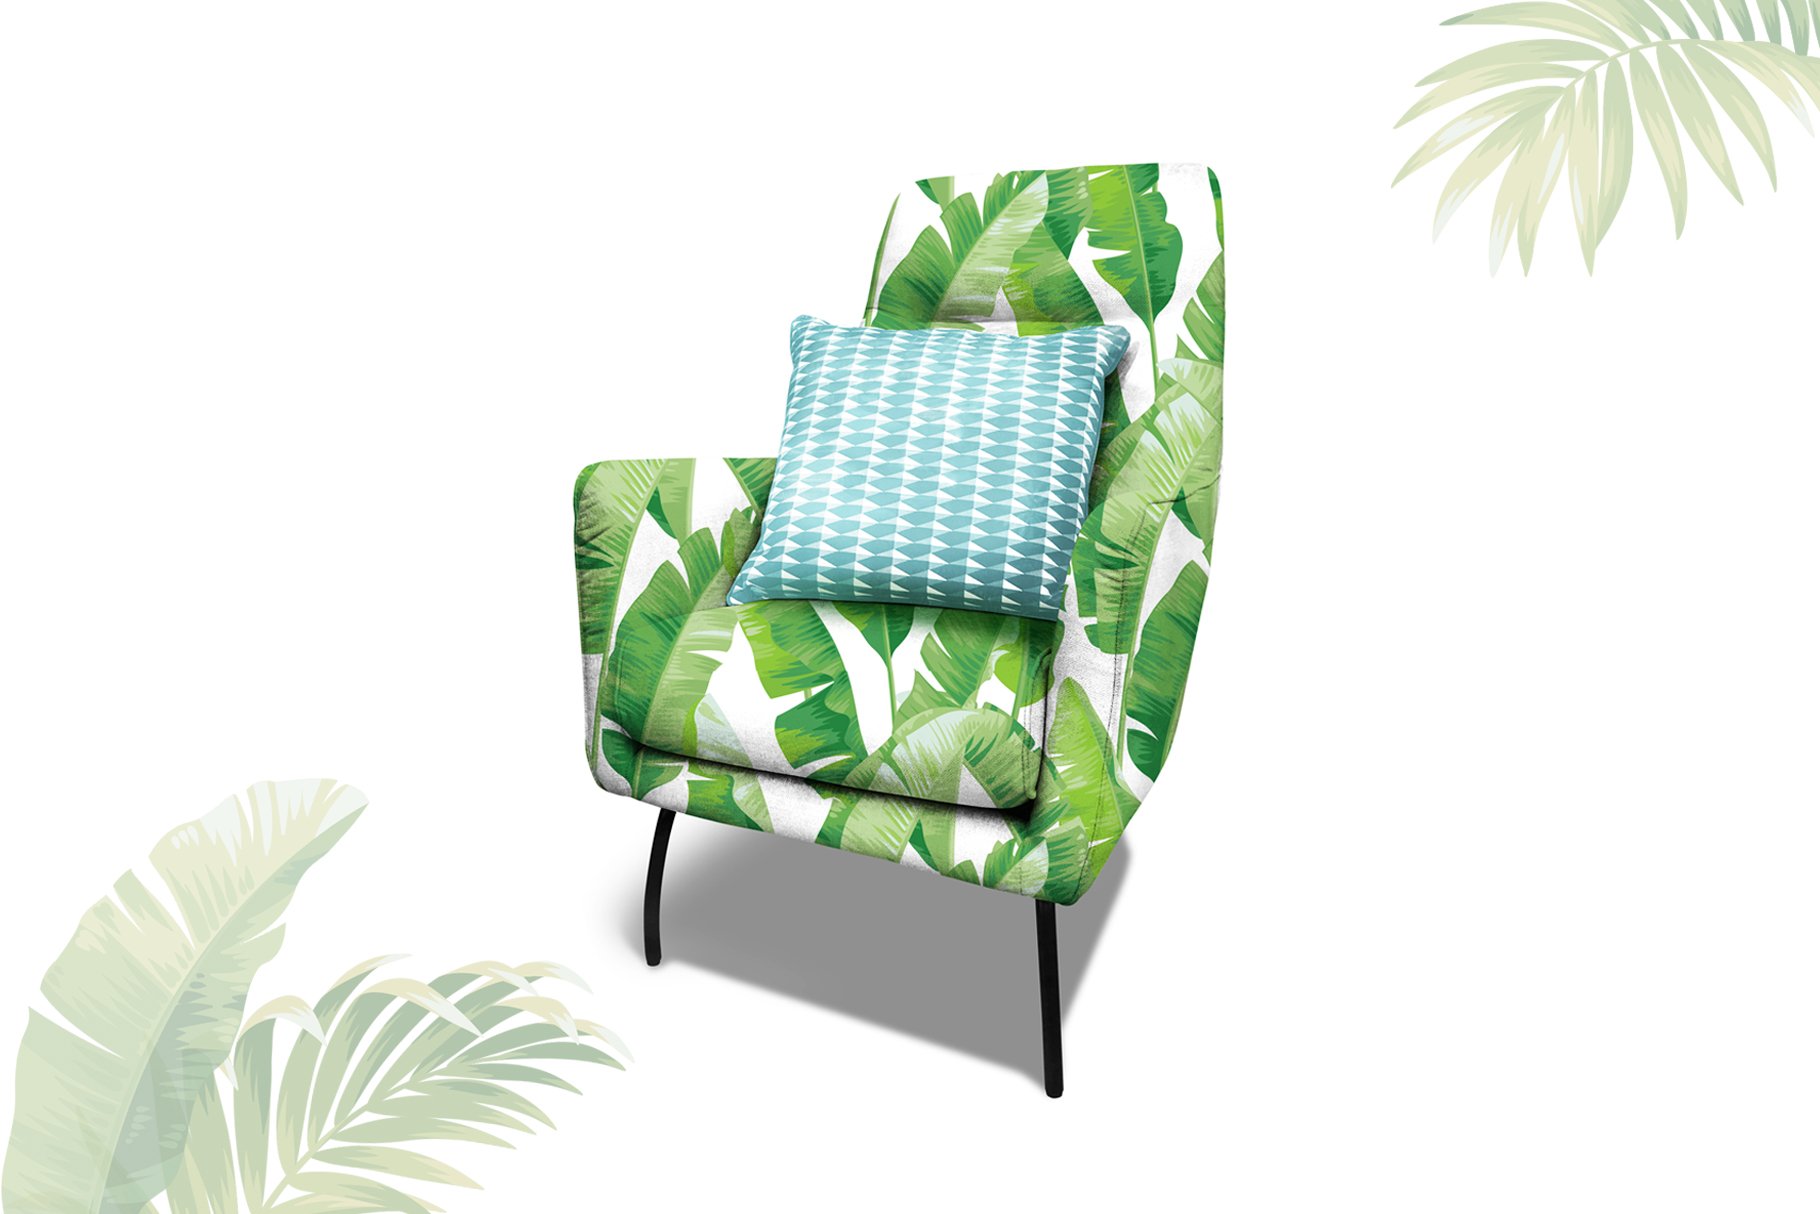 Tropical banana leaves pattern. preview image.